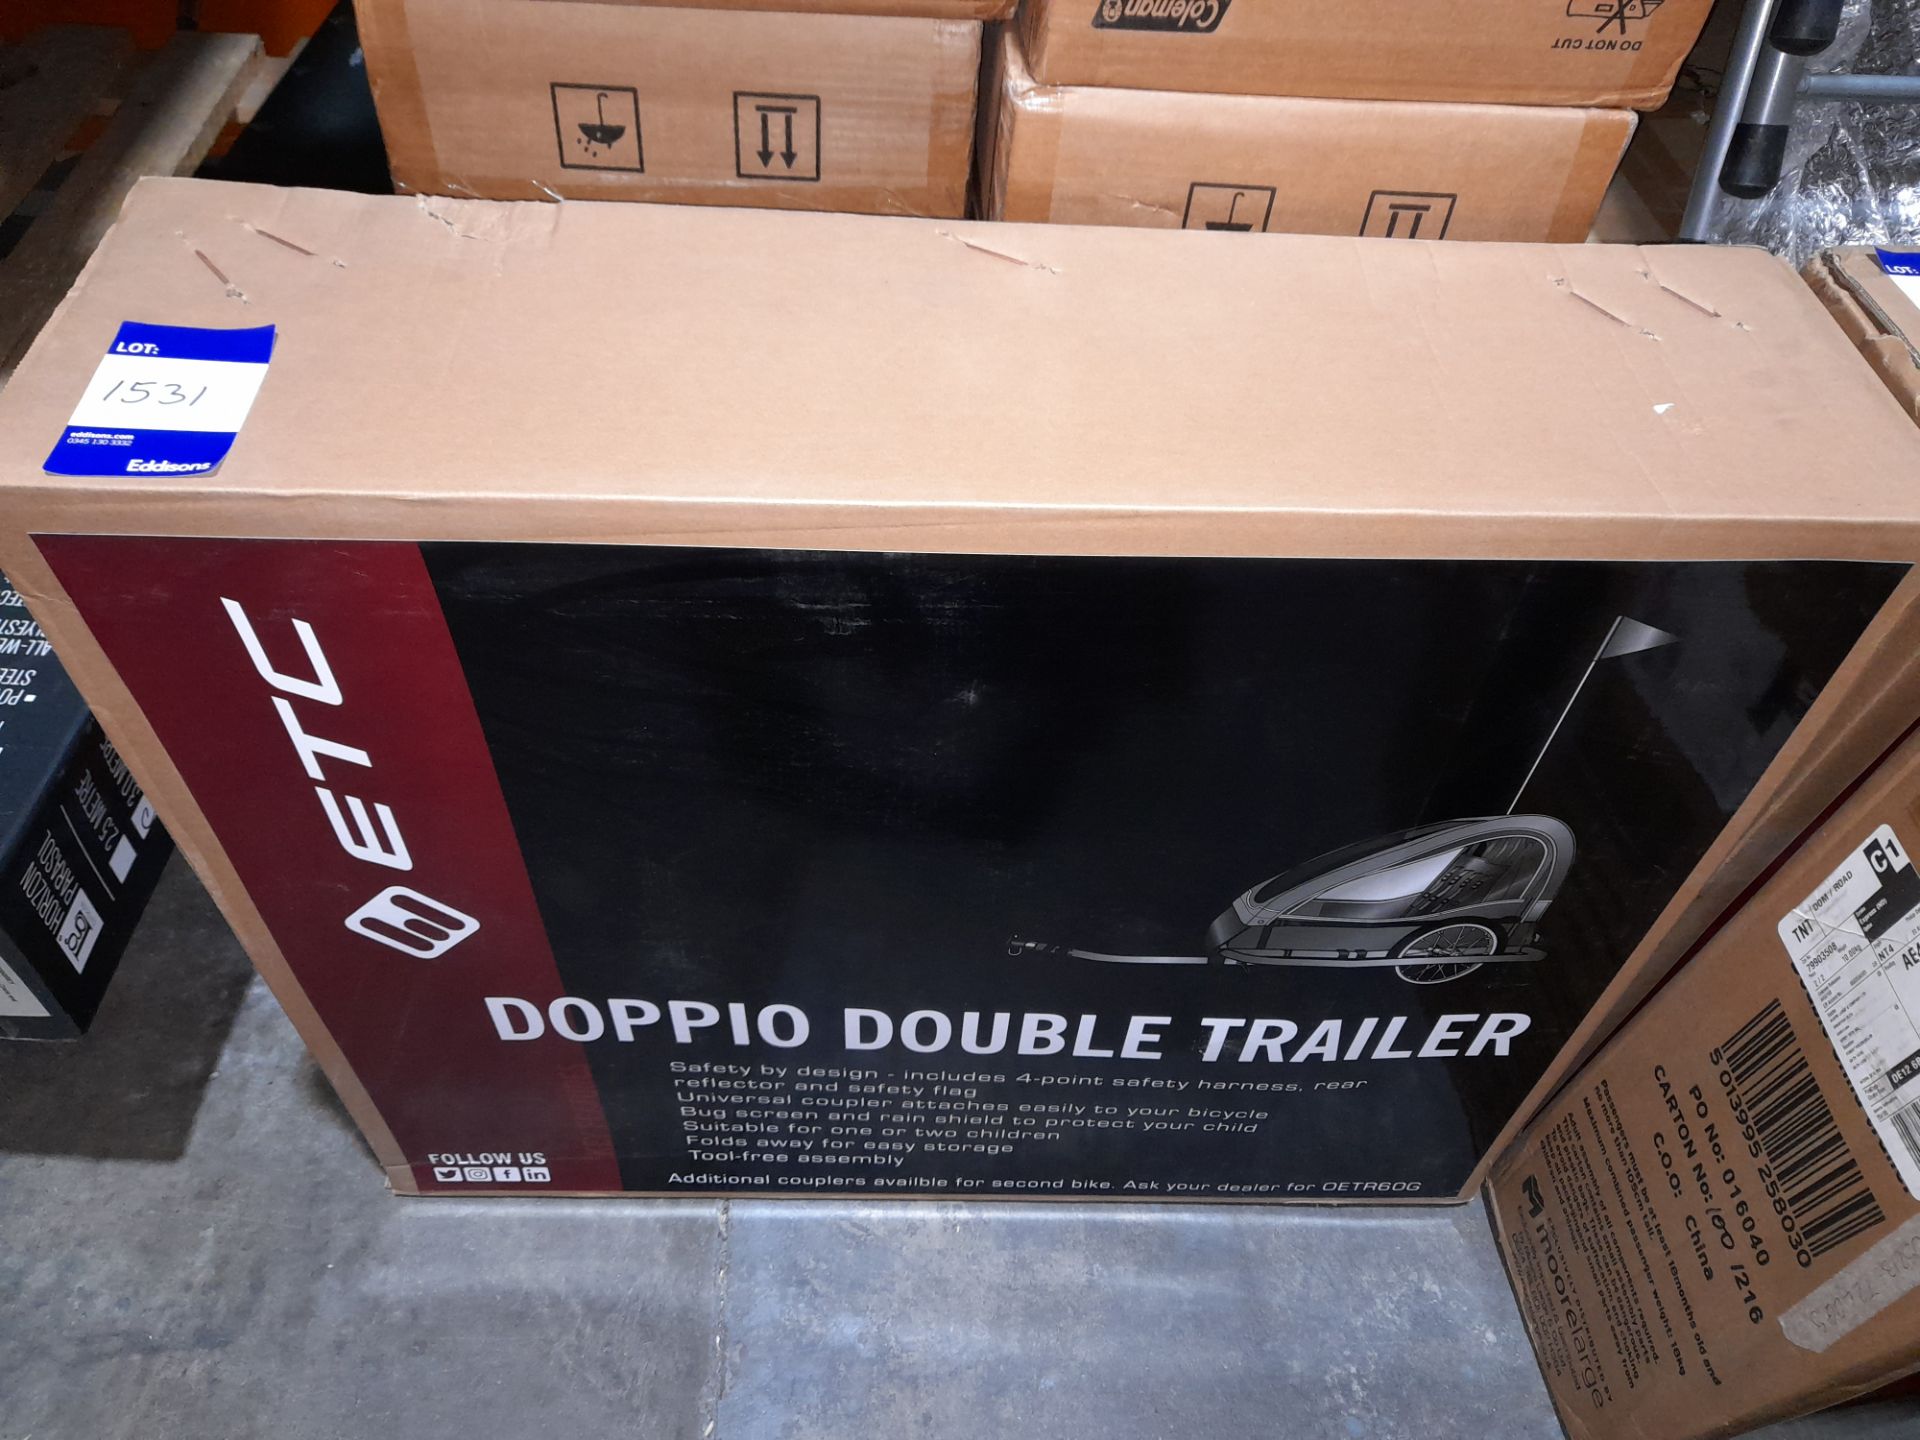 ETC Doppio Double Trailer 20-Inch Wheel (This lot forms part of composite lot 1621 and at the end of - Image 2 of 2